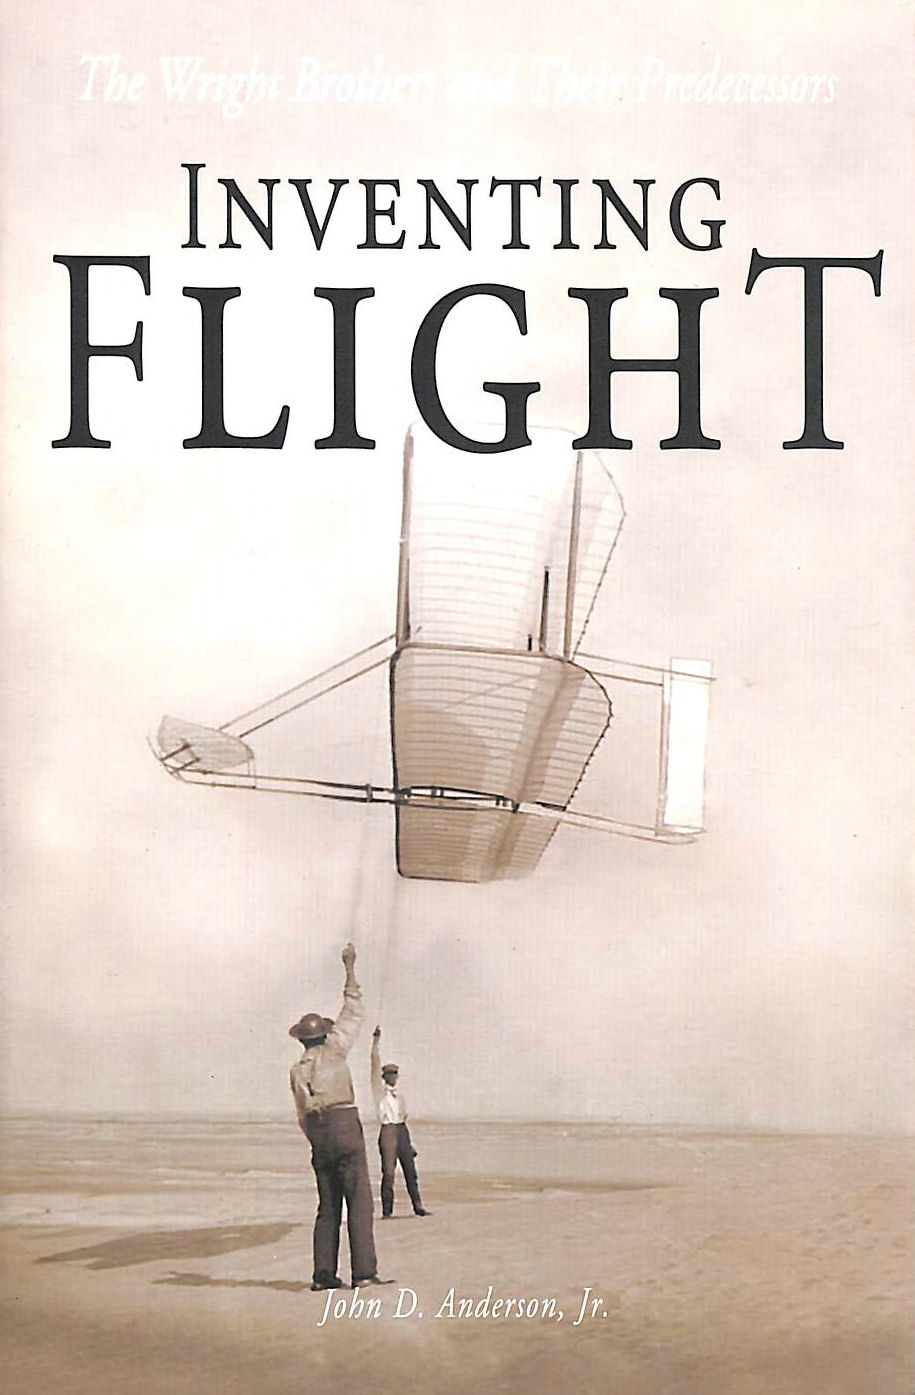 ANDERSON JR., JOHN D. - Inventing Flight: The Wright Brothers and Their Predecessors